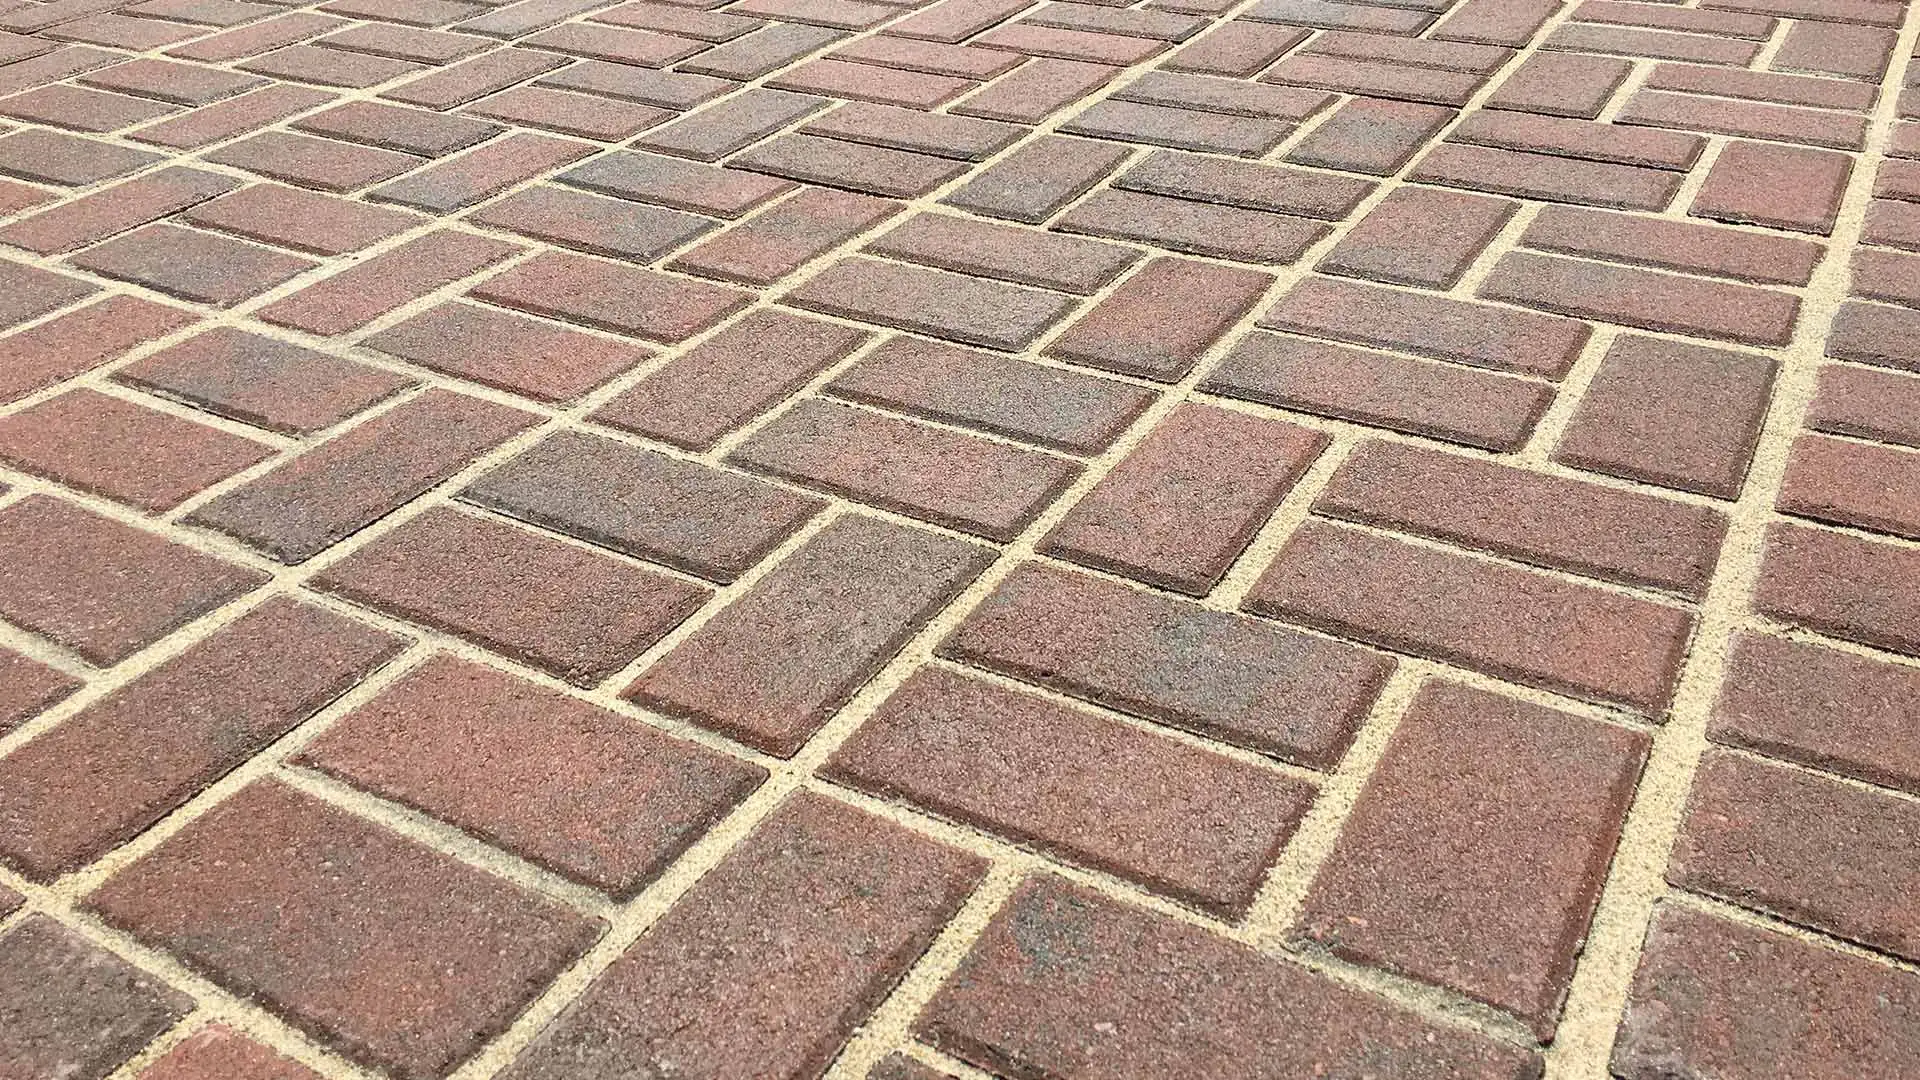 Red brick pavers up close at a home in Naples, FL.